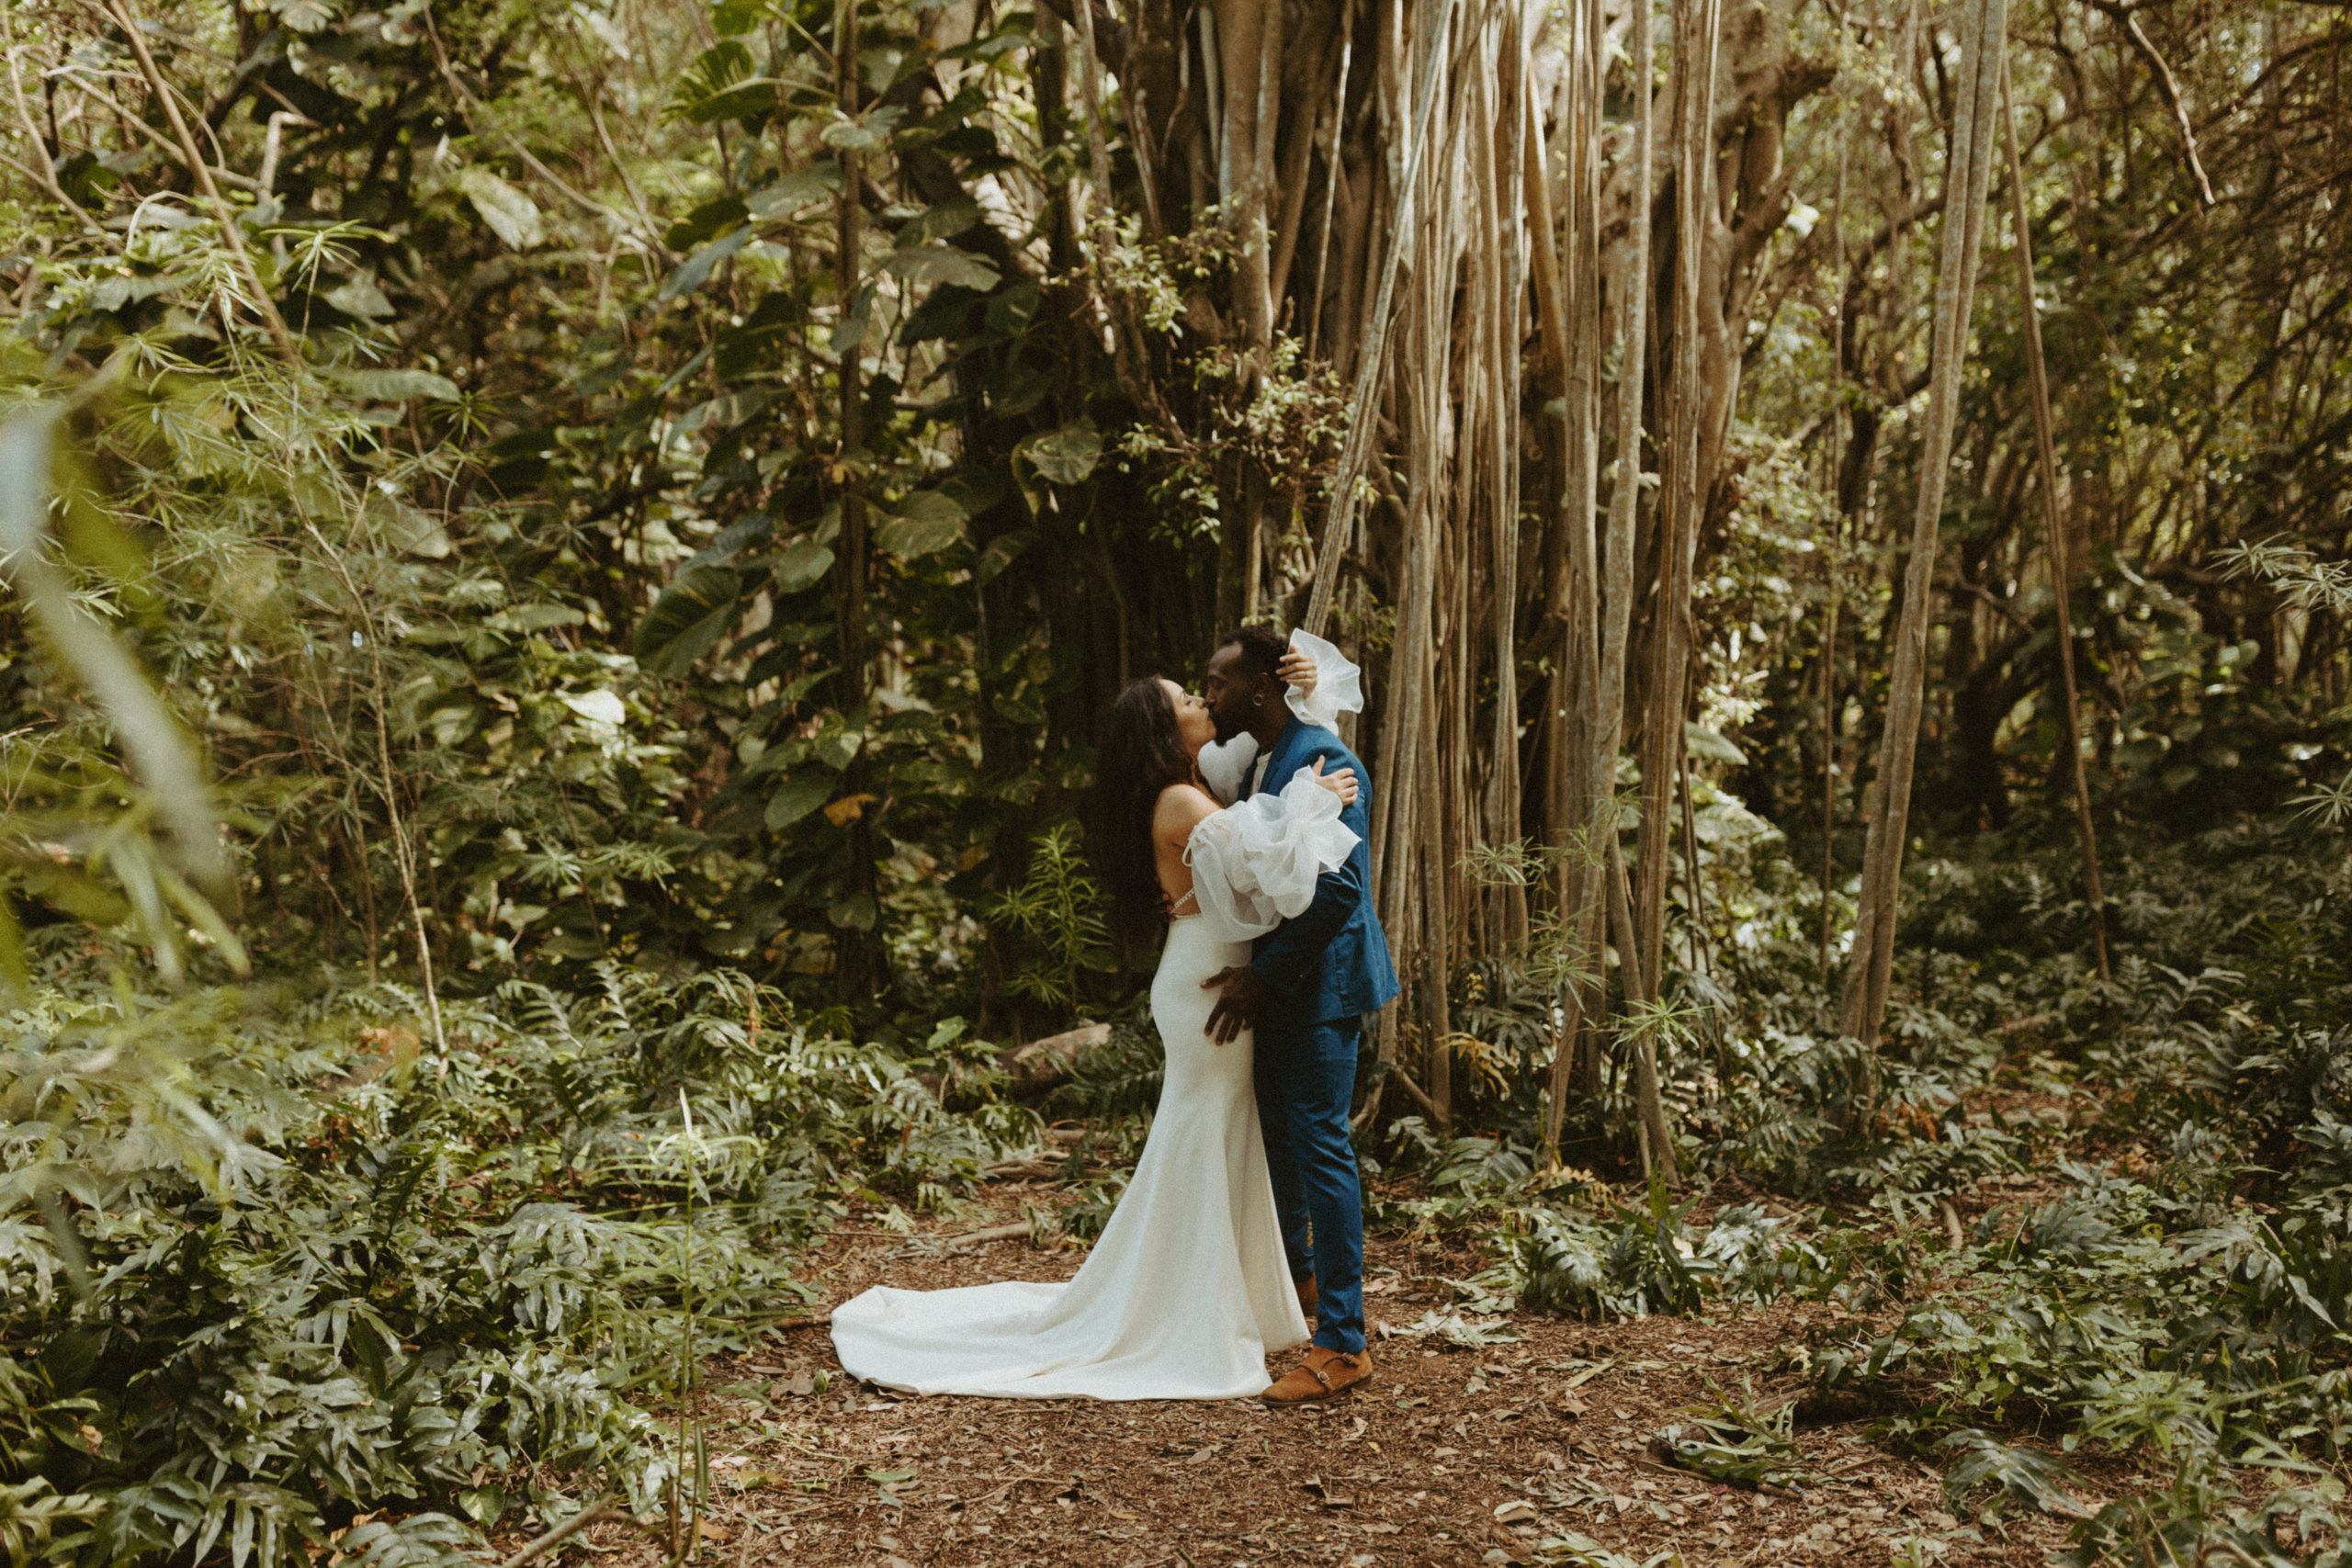 the couple kissing in Hawaii during their elopement